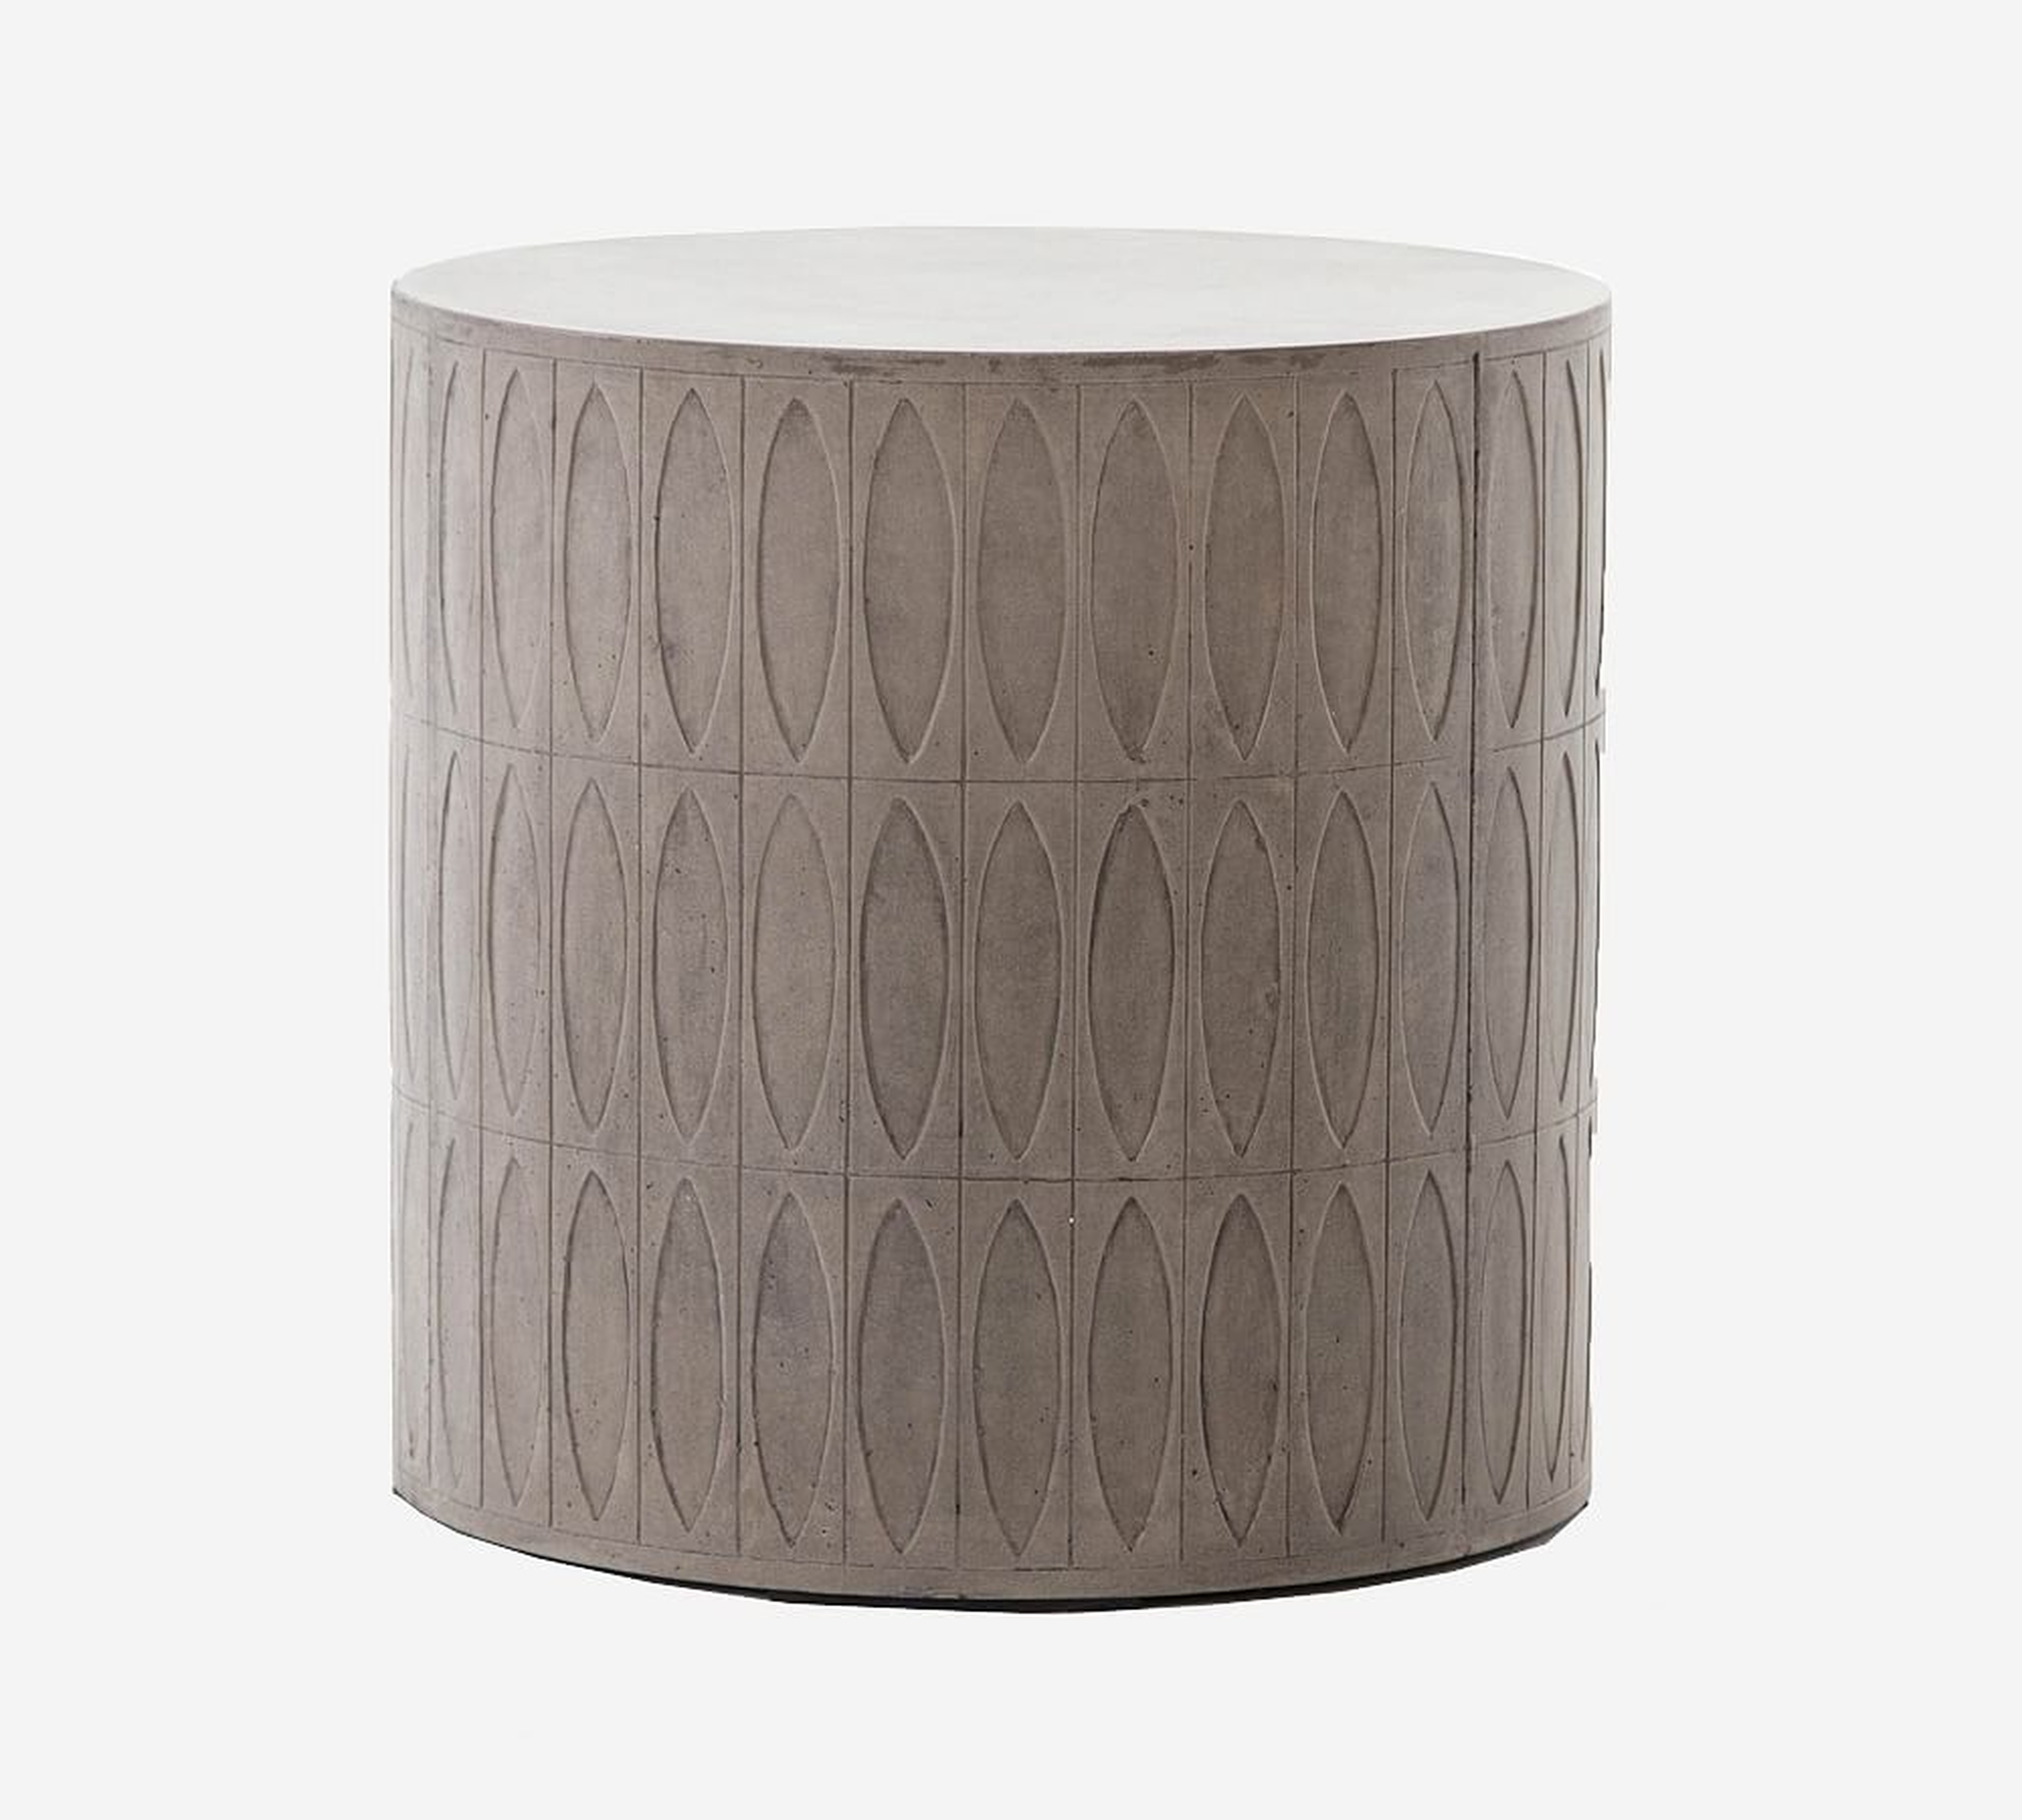 Woolf Concrete Round End Table, Gray - Pottery Barn